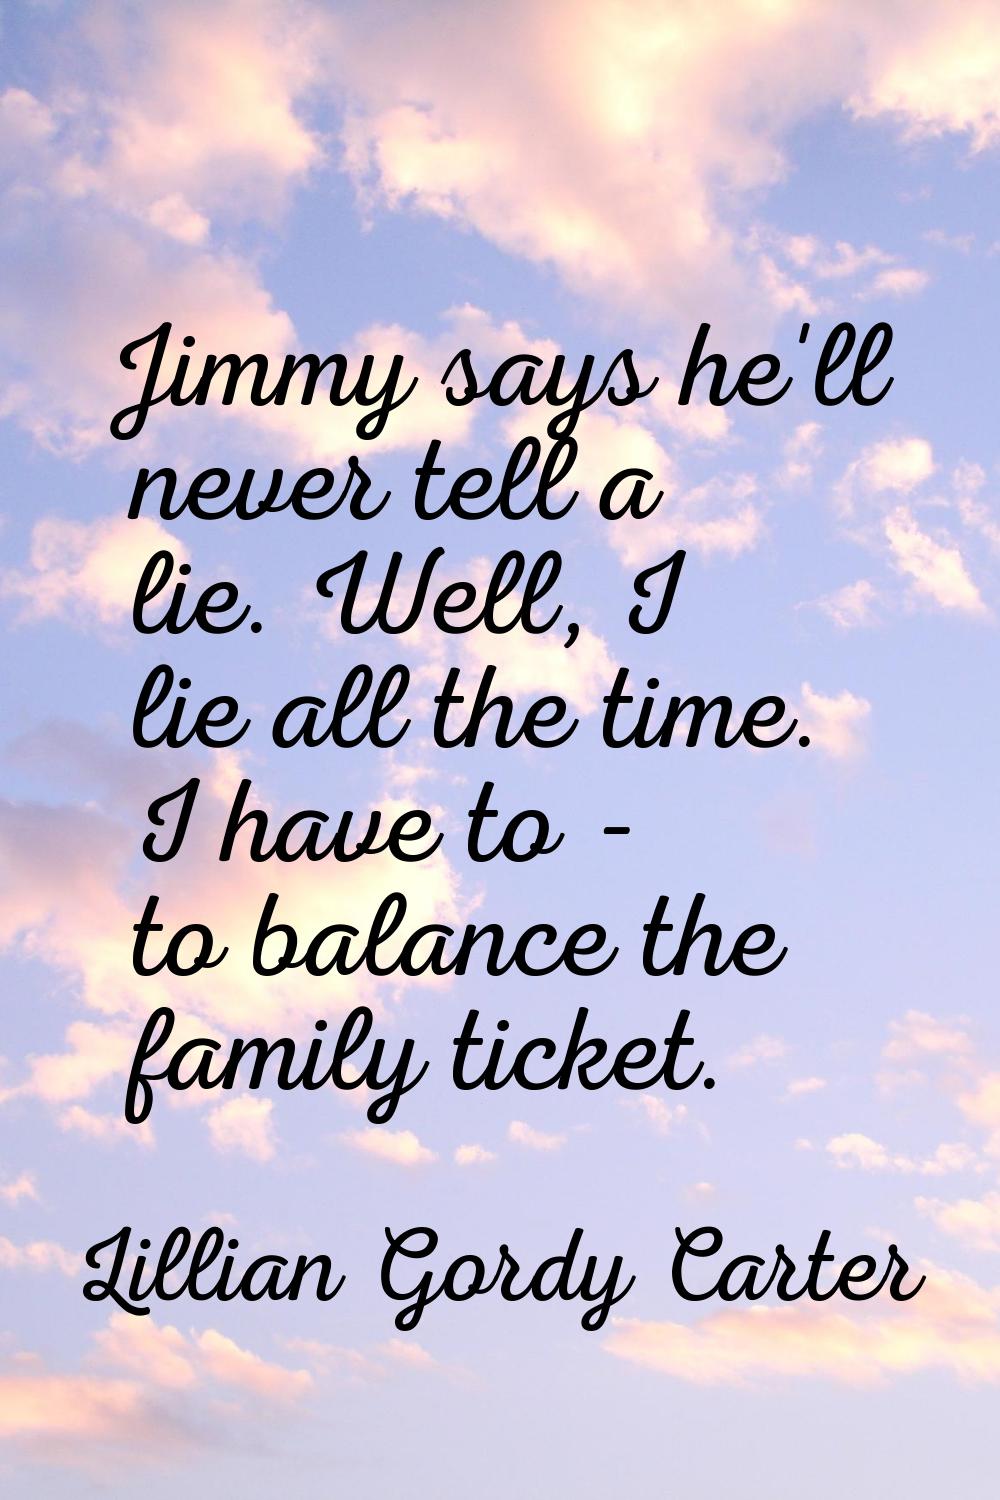 Jimmy says he'll never tell a lie. Well, I lie all the time. I have to - to balance the family tick